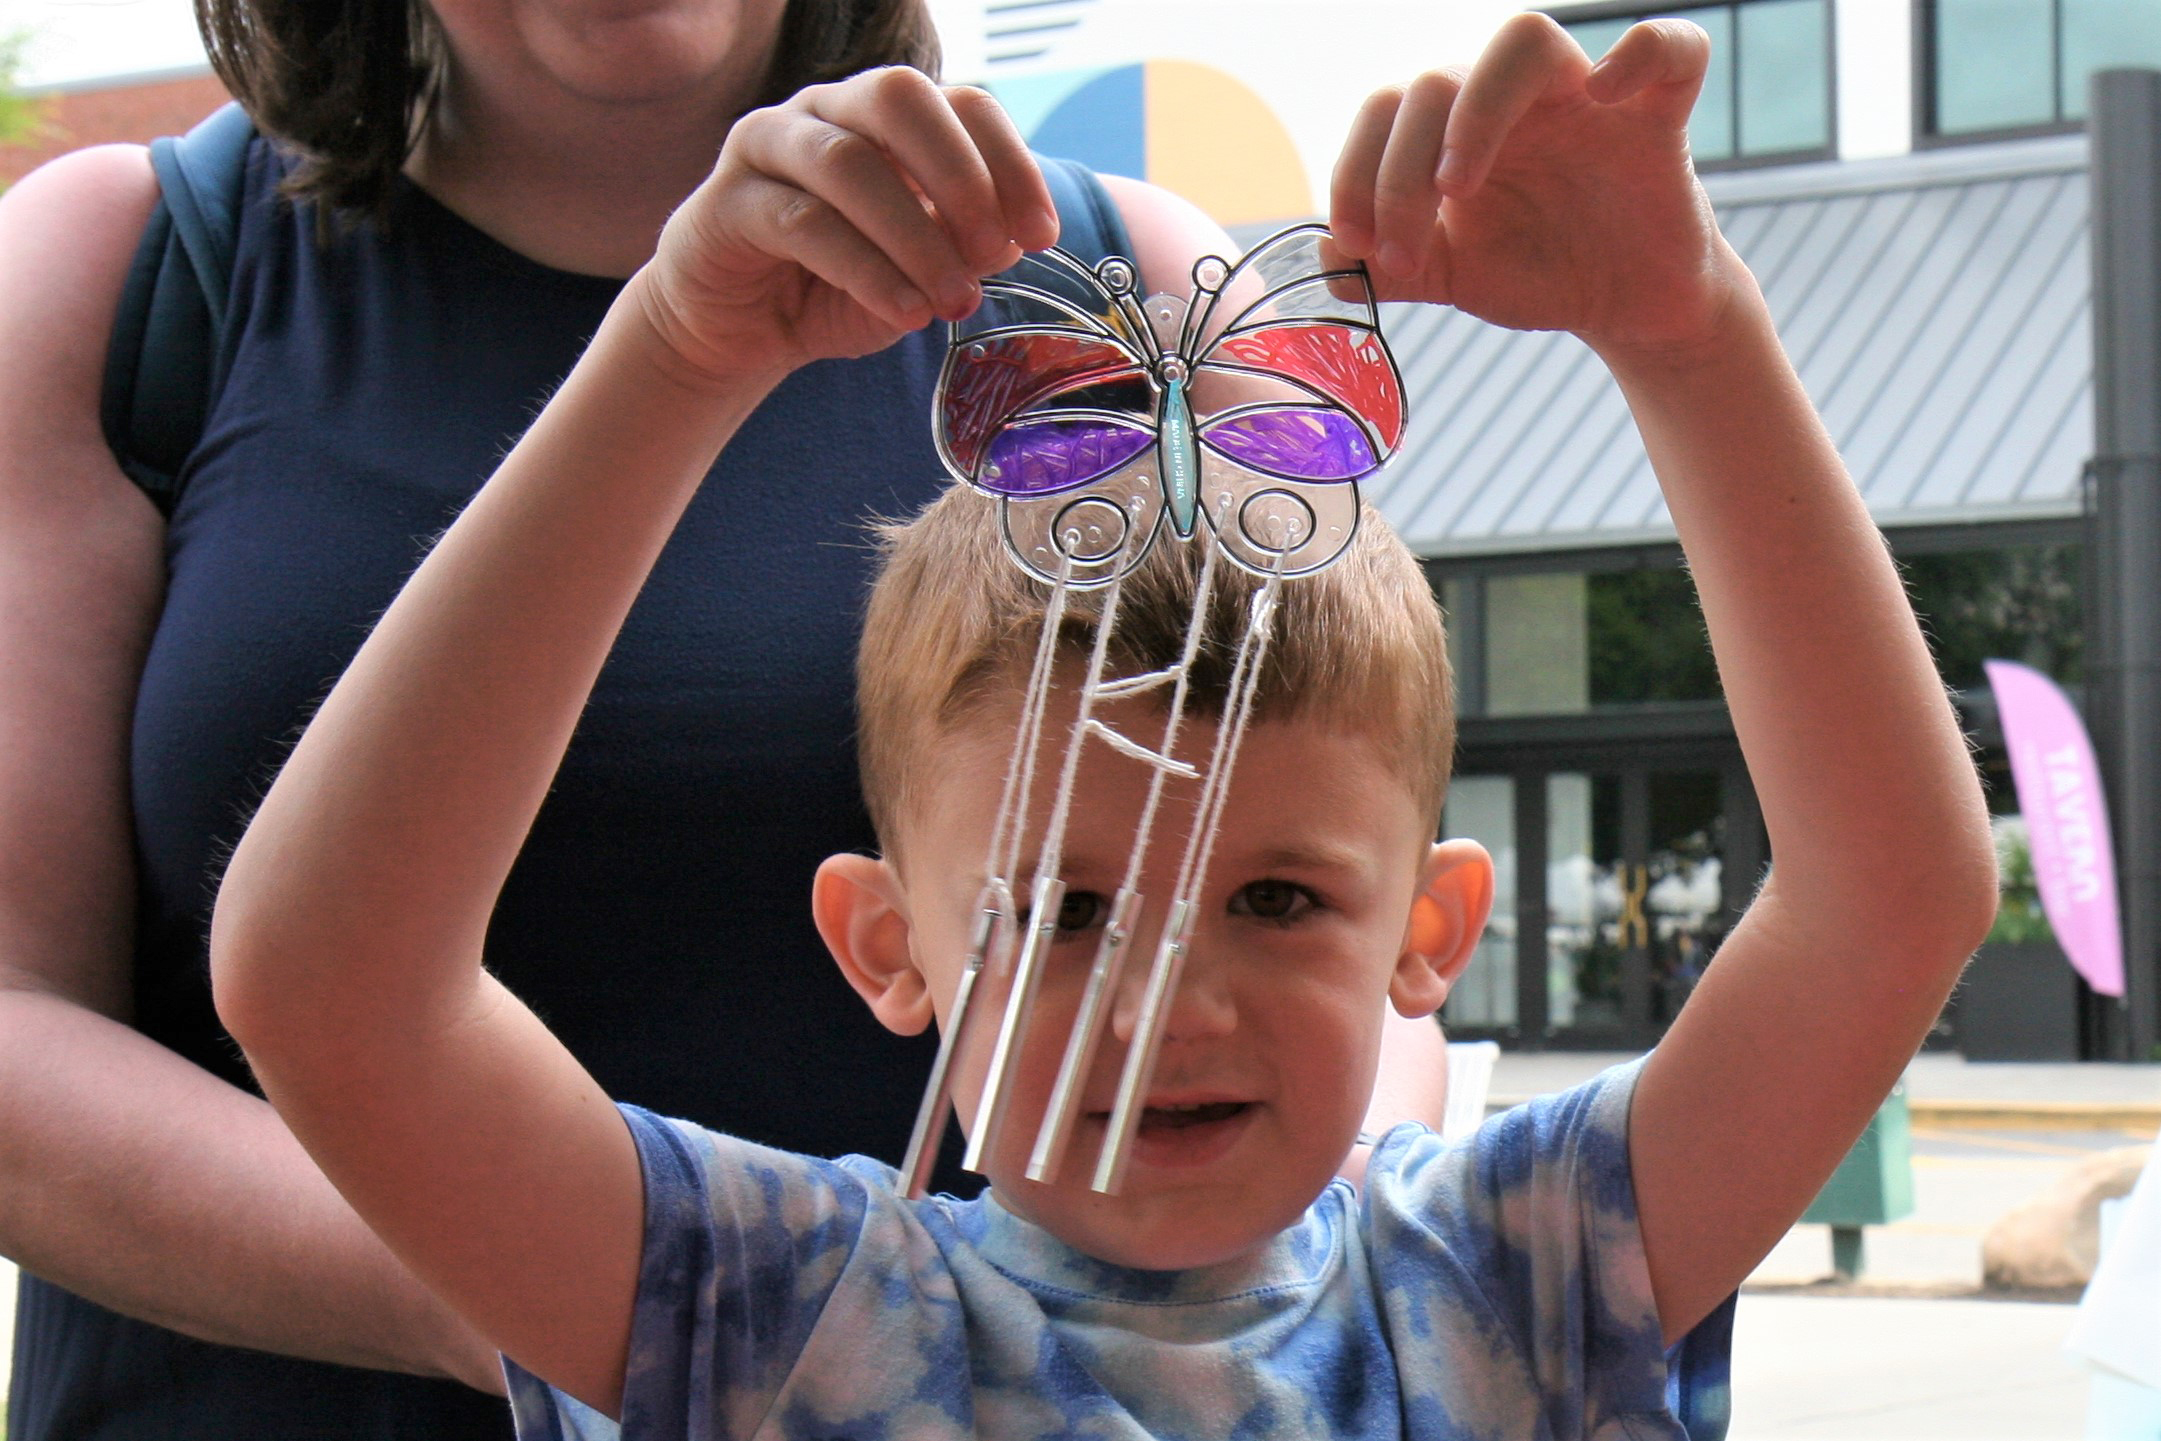 Young boy holds up a small butterfly windchime he crafted